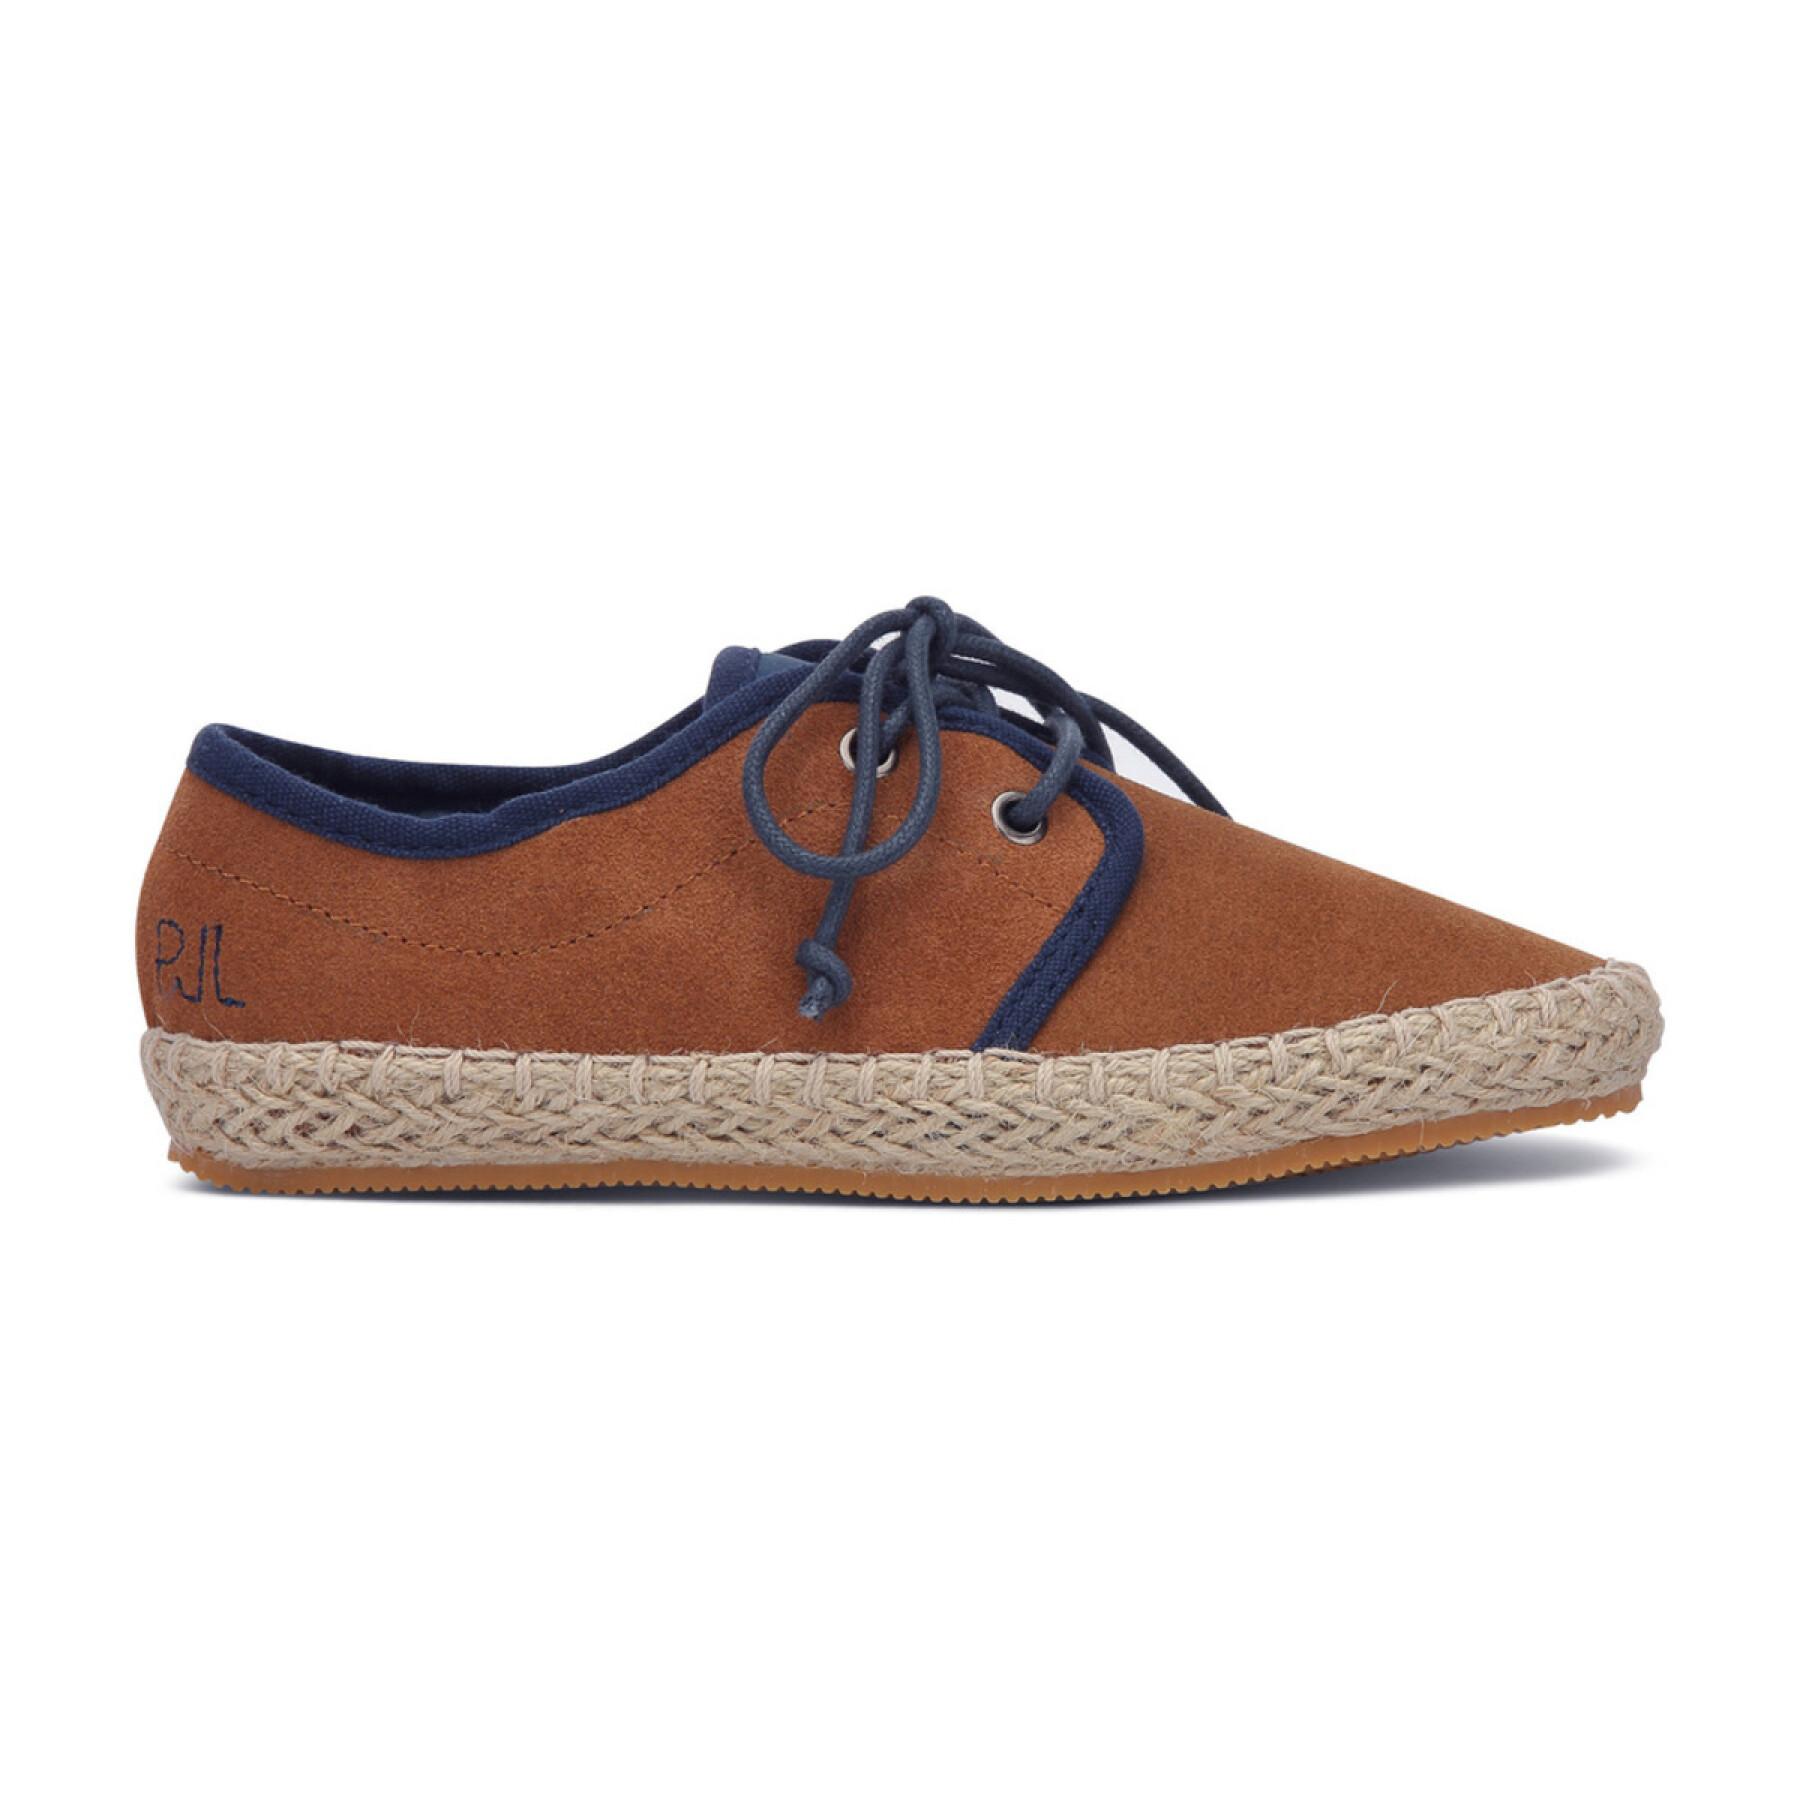 Baskets enfant Pepe Jeans Game Closed Suede